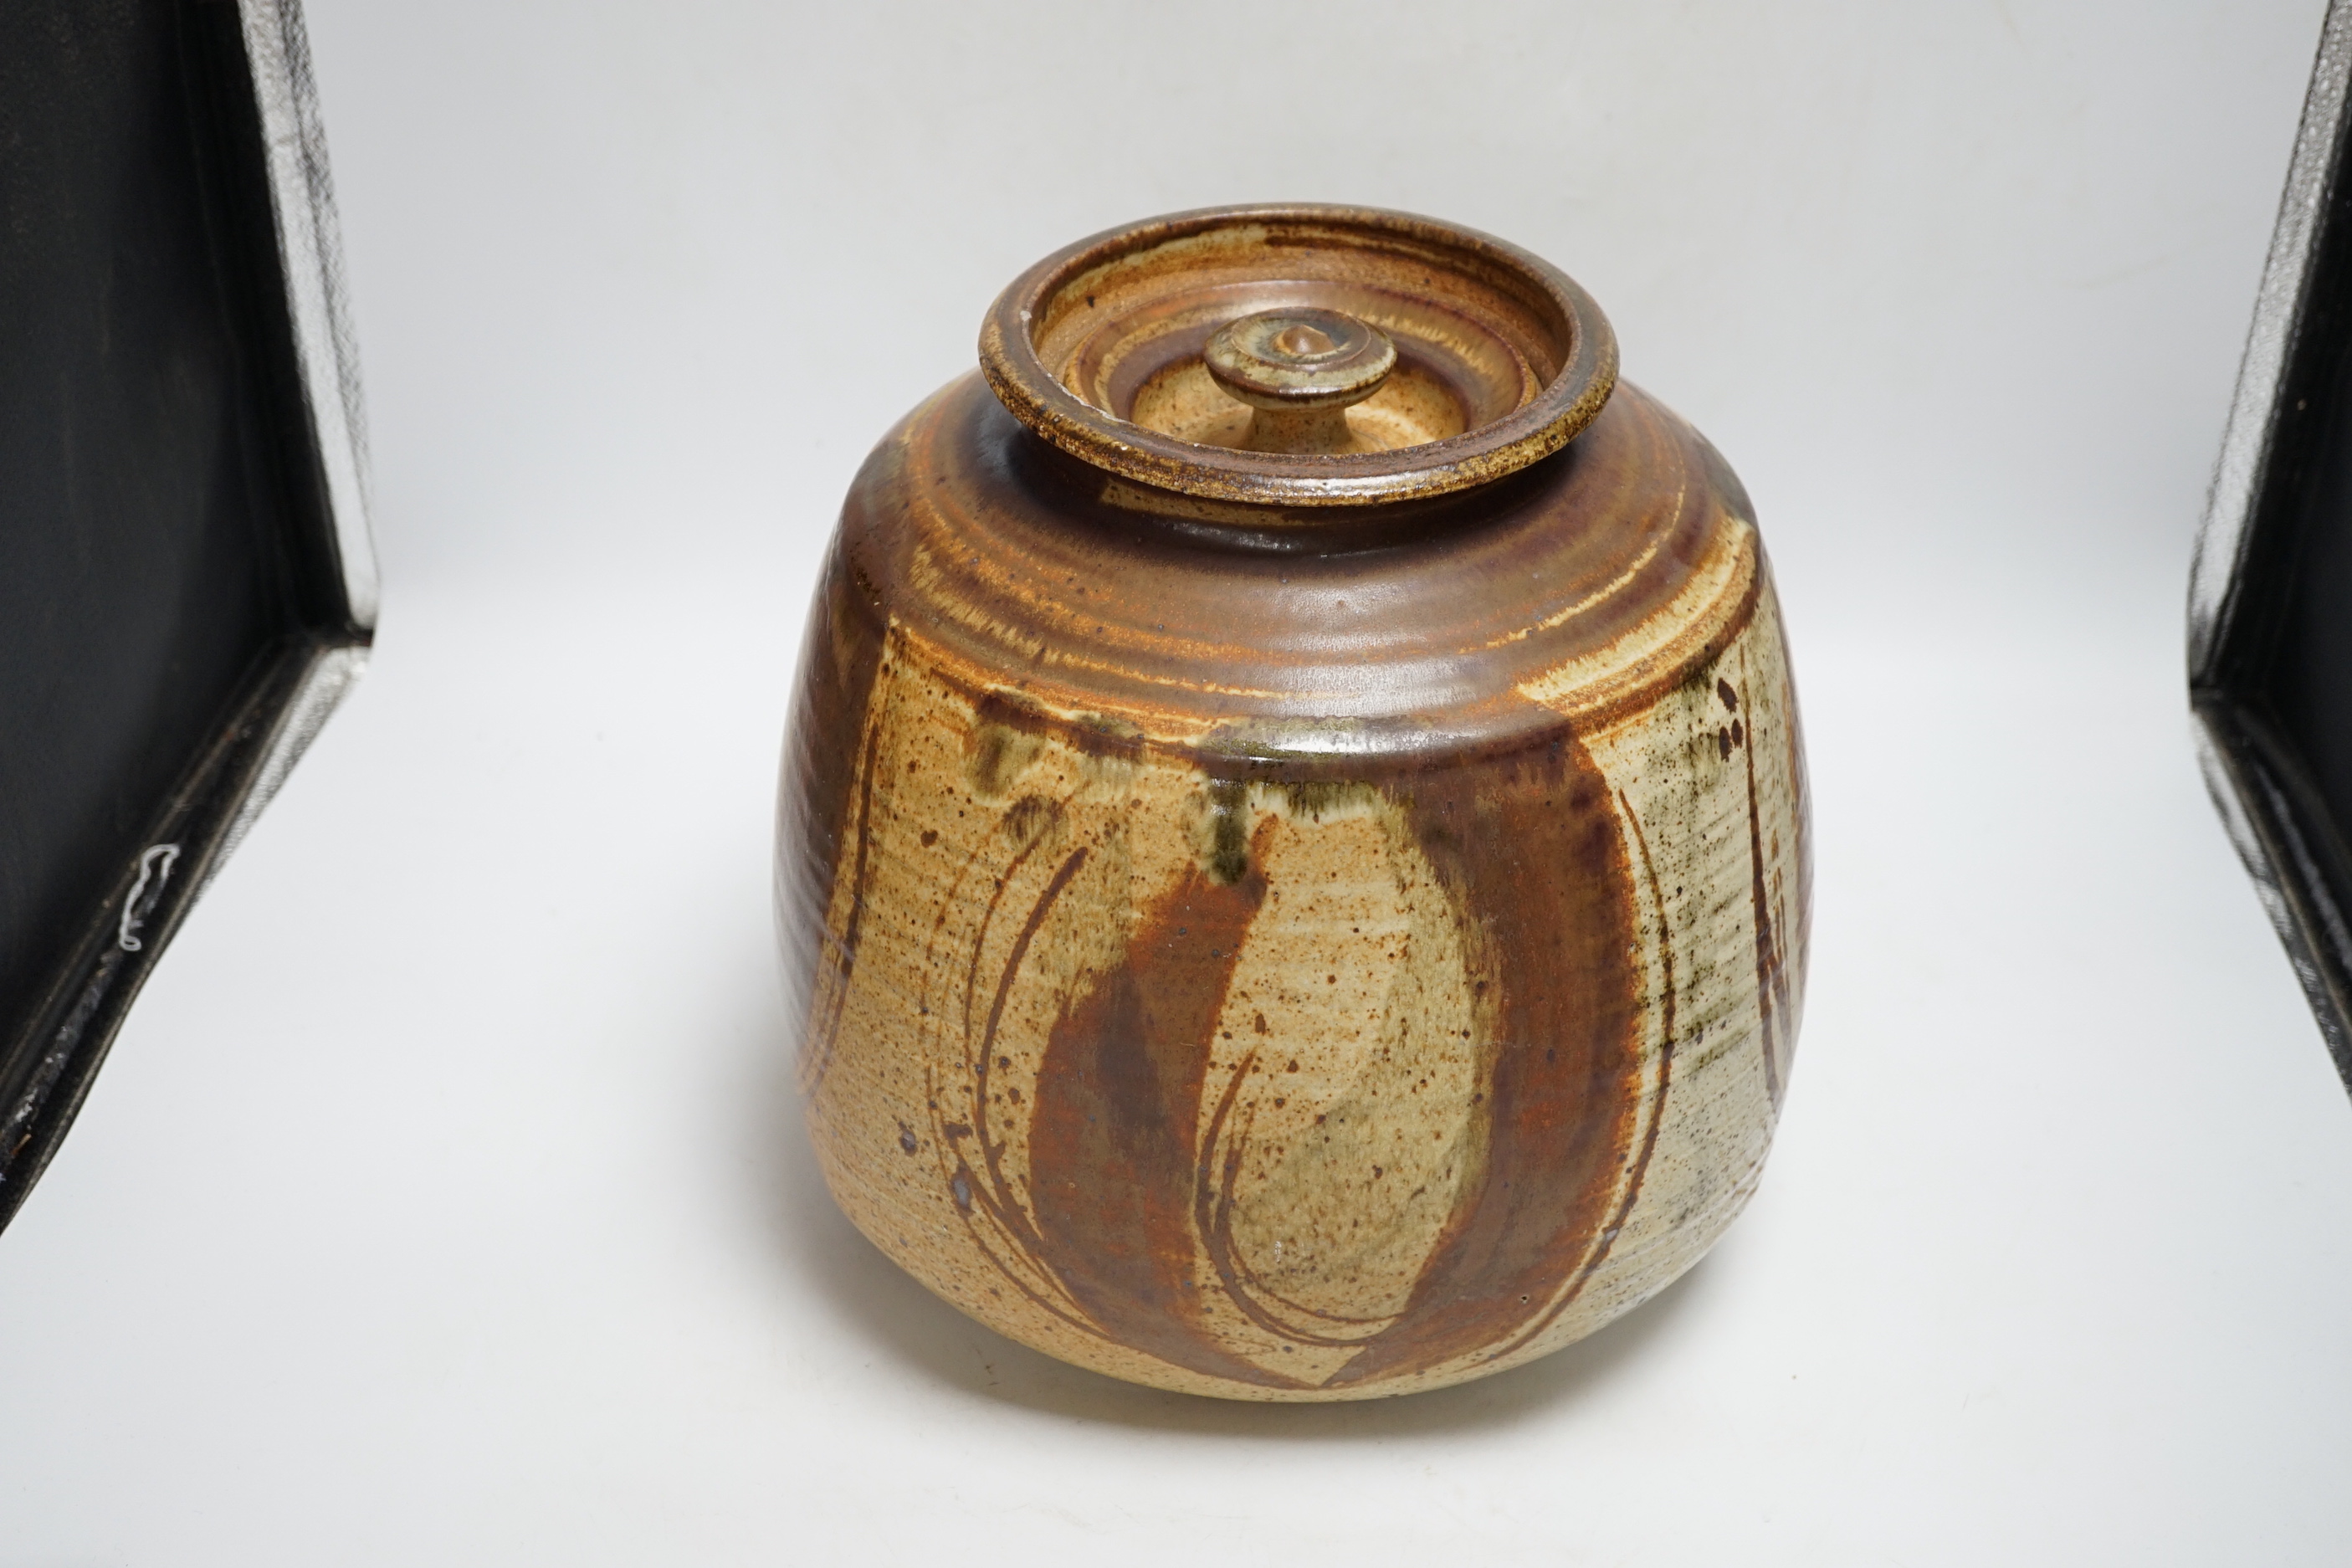 Michael Casson - a large studio pottery jar and cover, 27cm